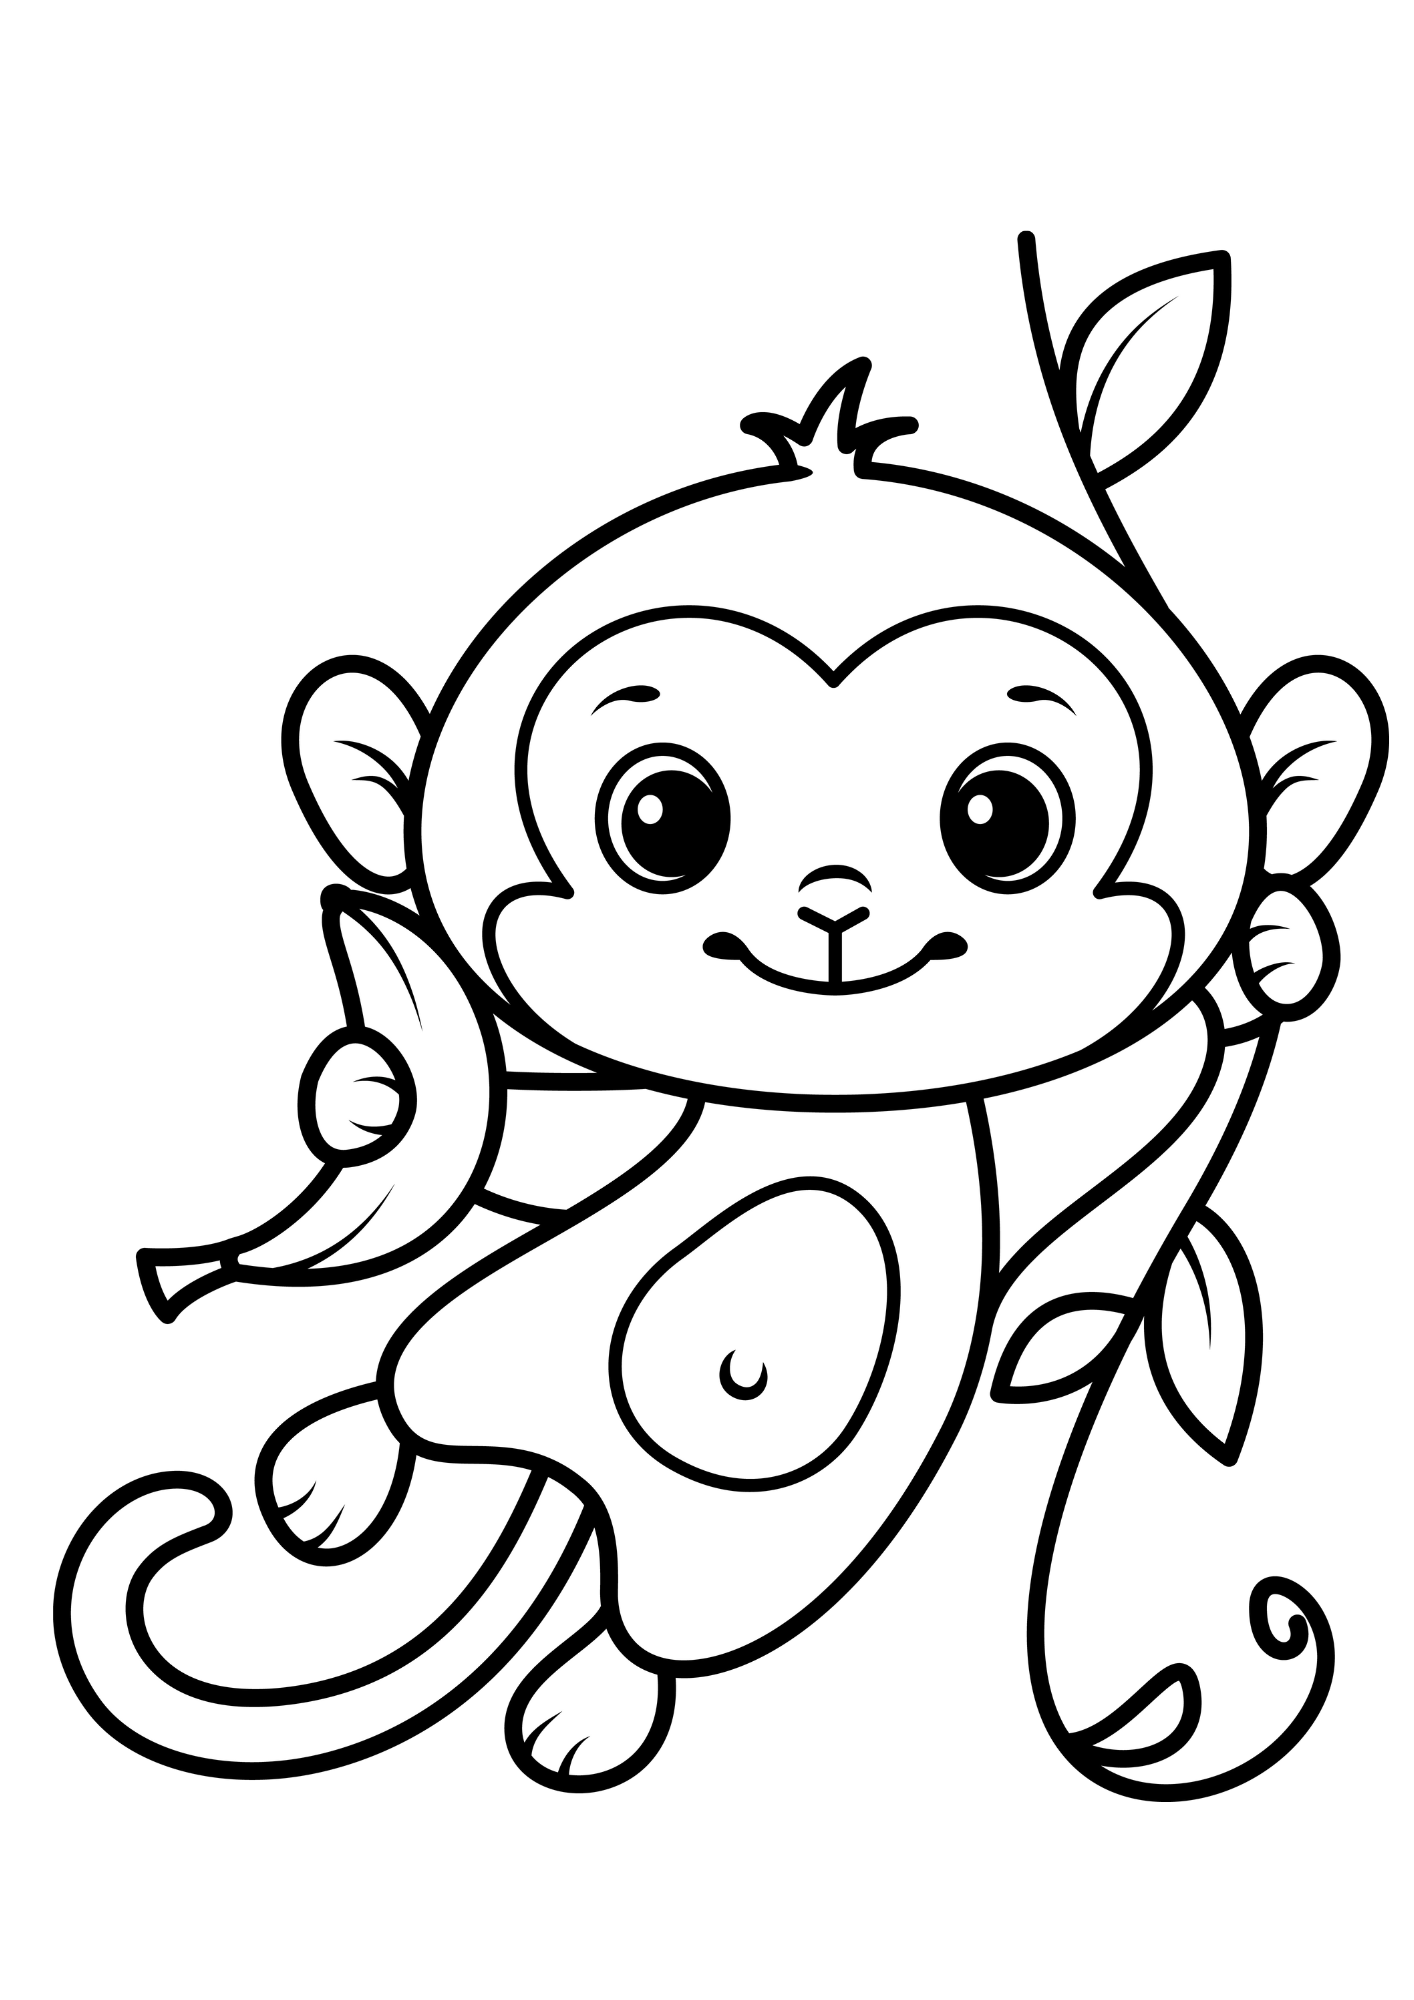 Happy Monkey Coloring Page